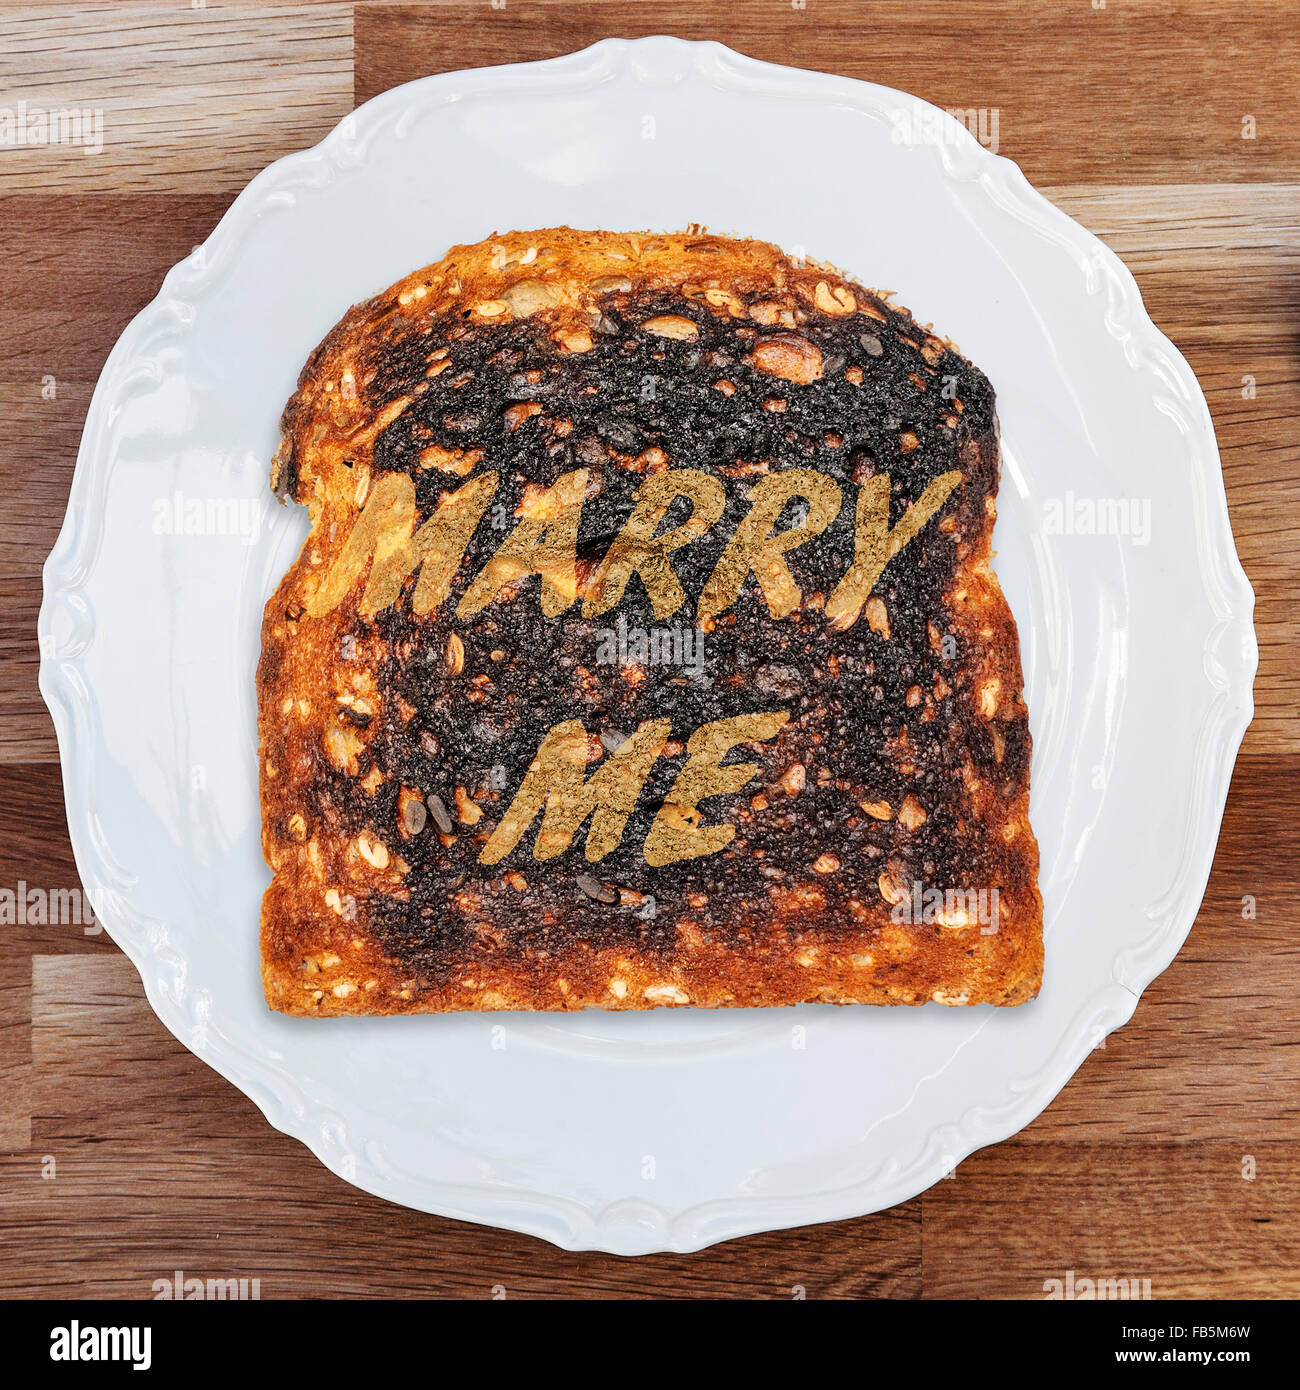 A slice of burnt toast with a marraige proposal message on a shiny white plate placed upon a wooden table surface. Stock Photo